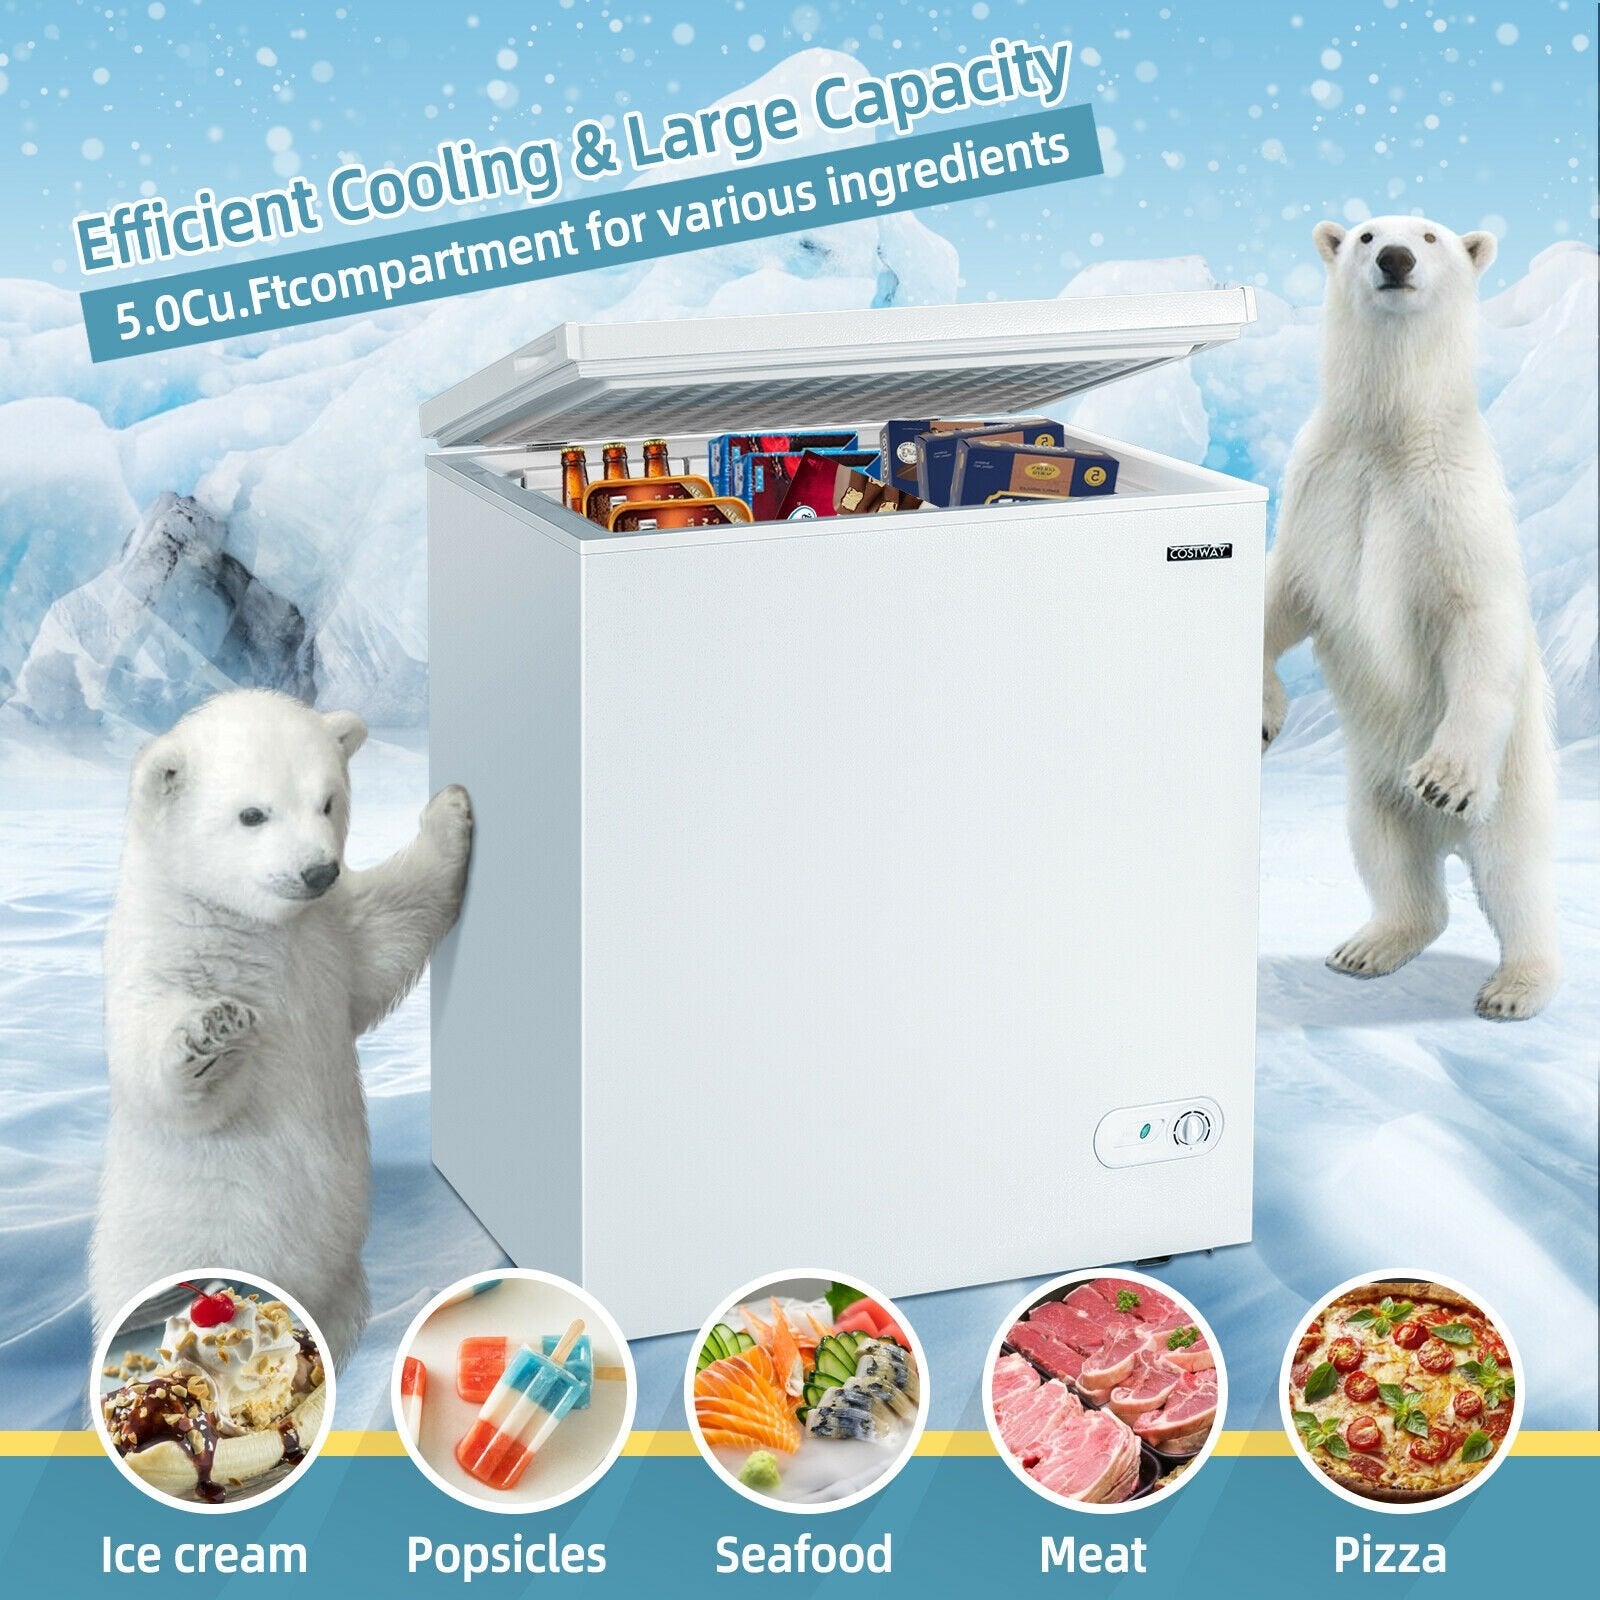 5.2 Cu.ft Chest Freezer Upright Single Door Refrigerator with 3 Baskets, White - Gallery Canada